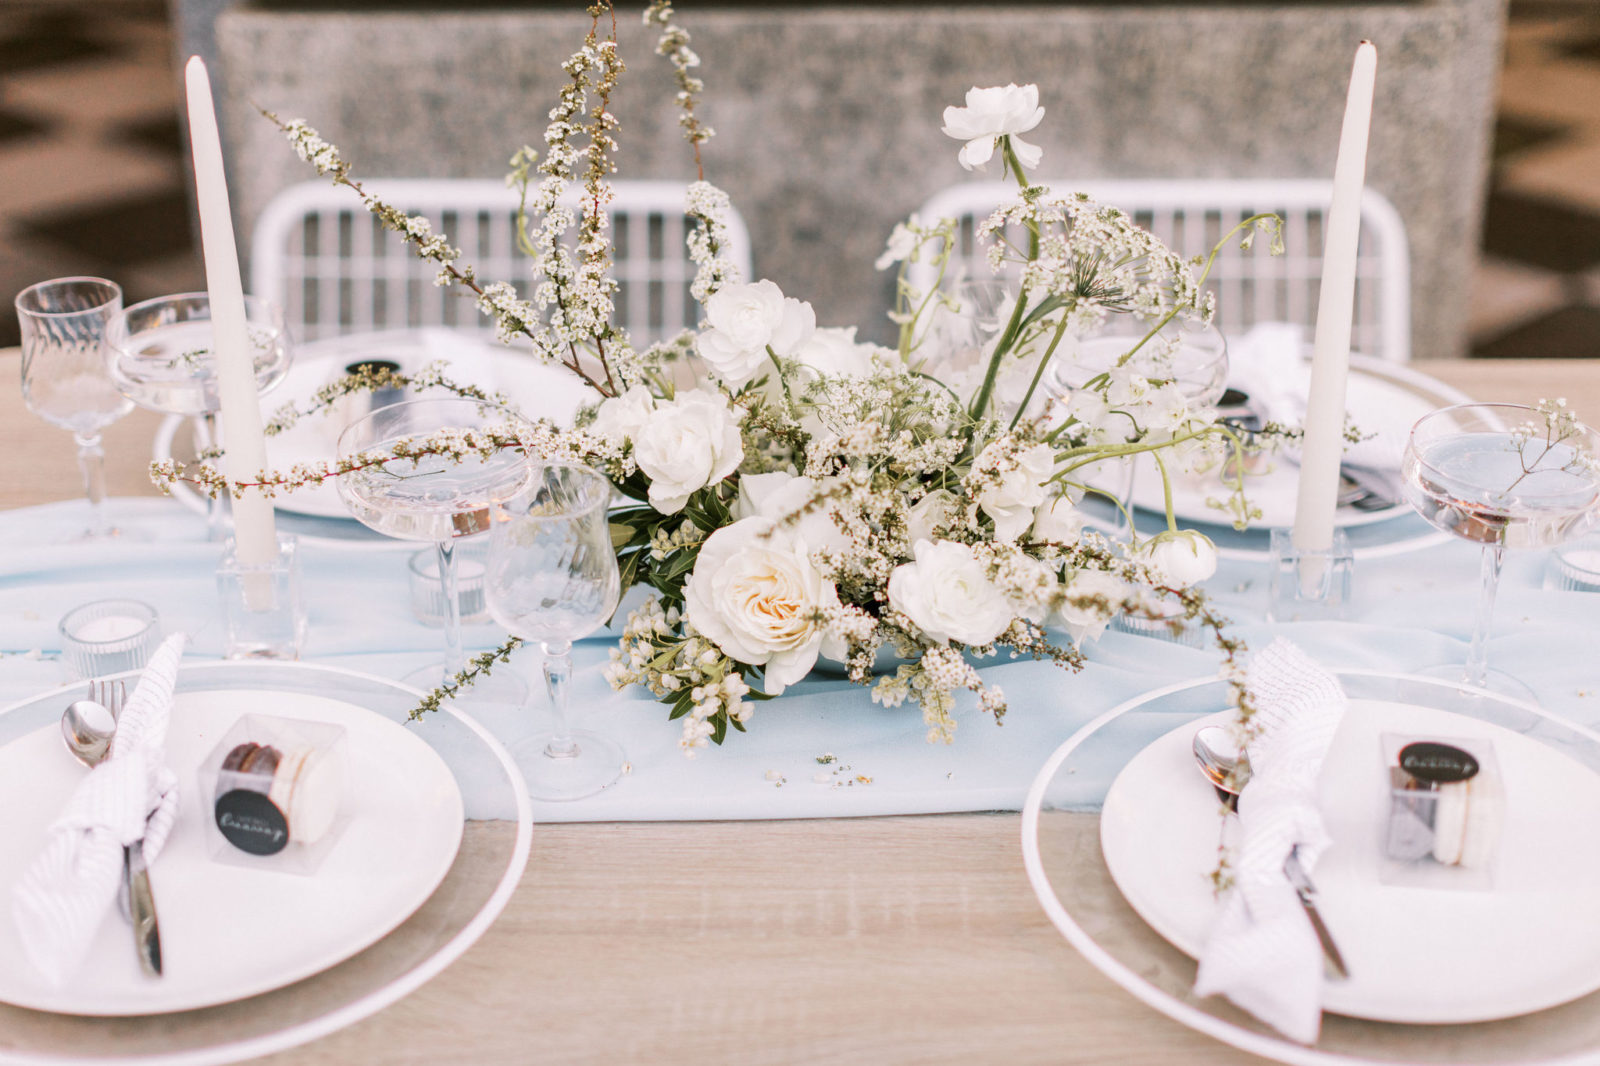 Chic table settings for a modern downtown elopement with white and blue accents